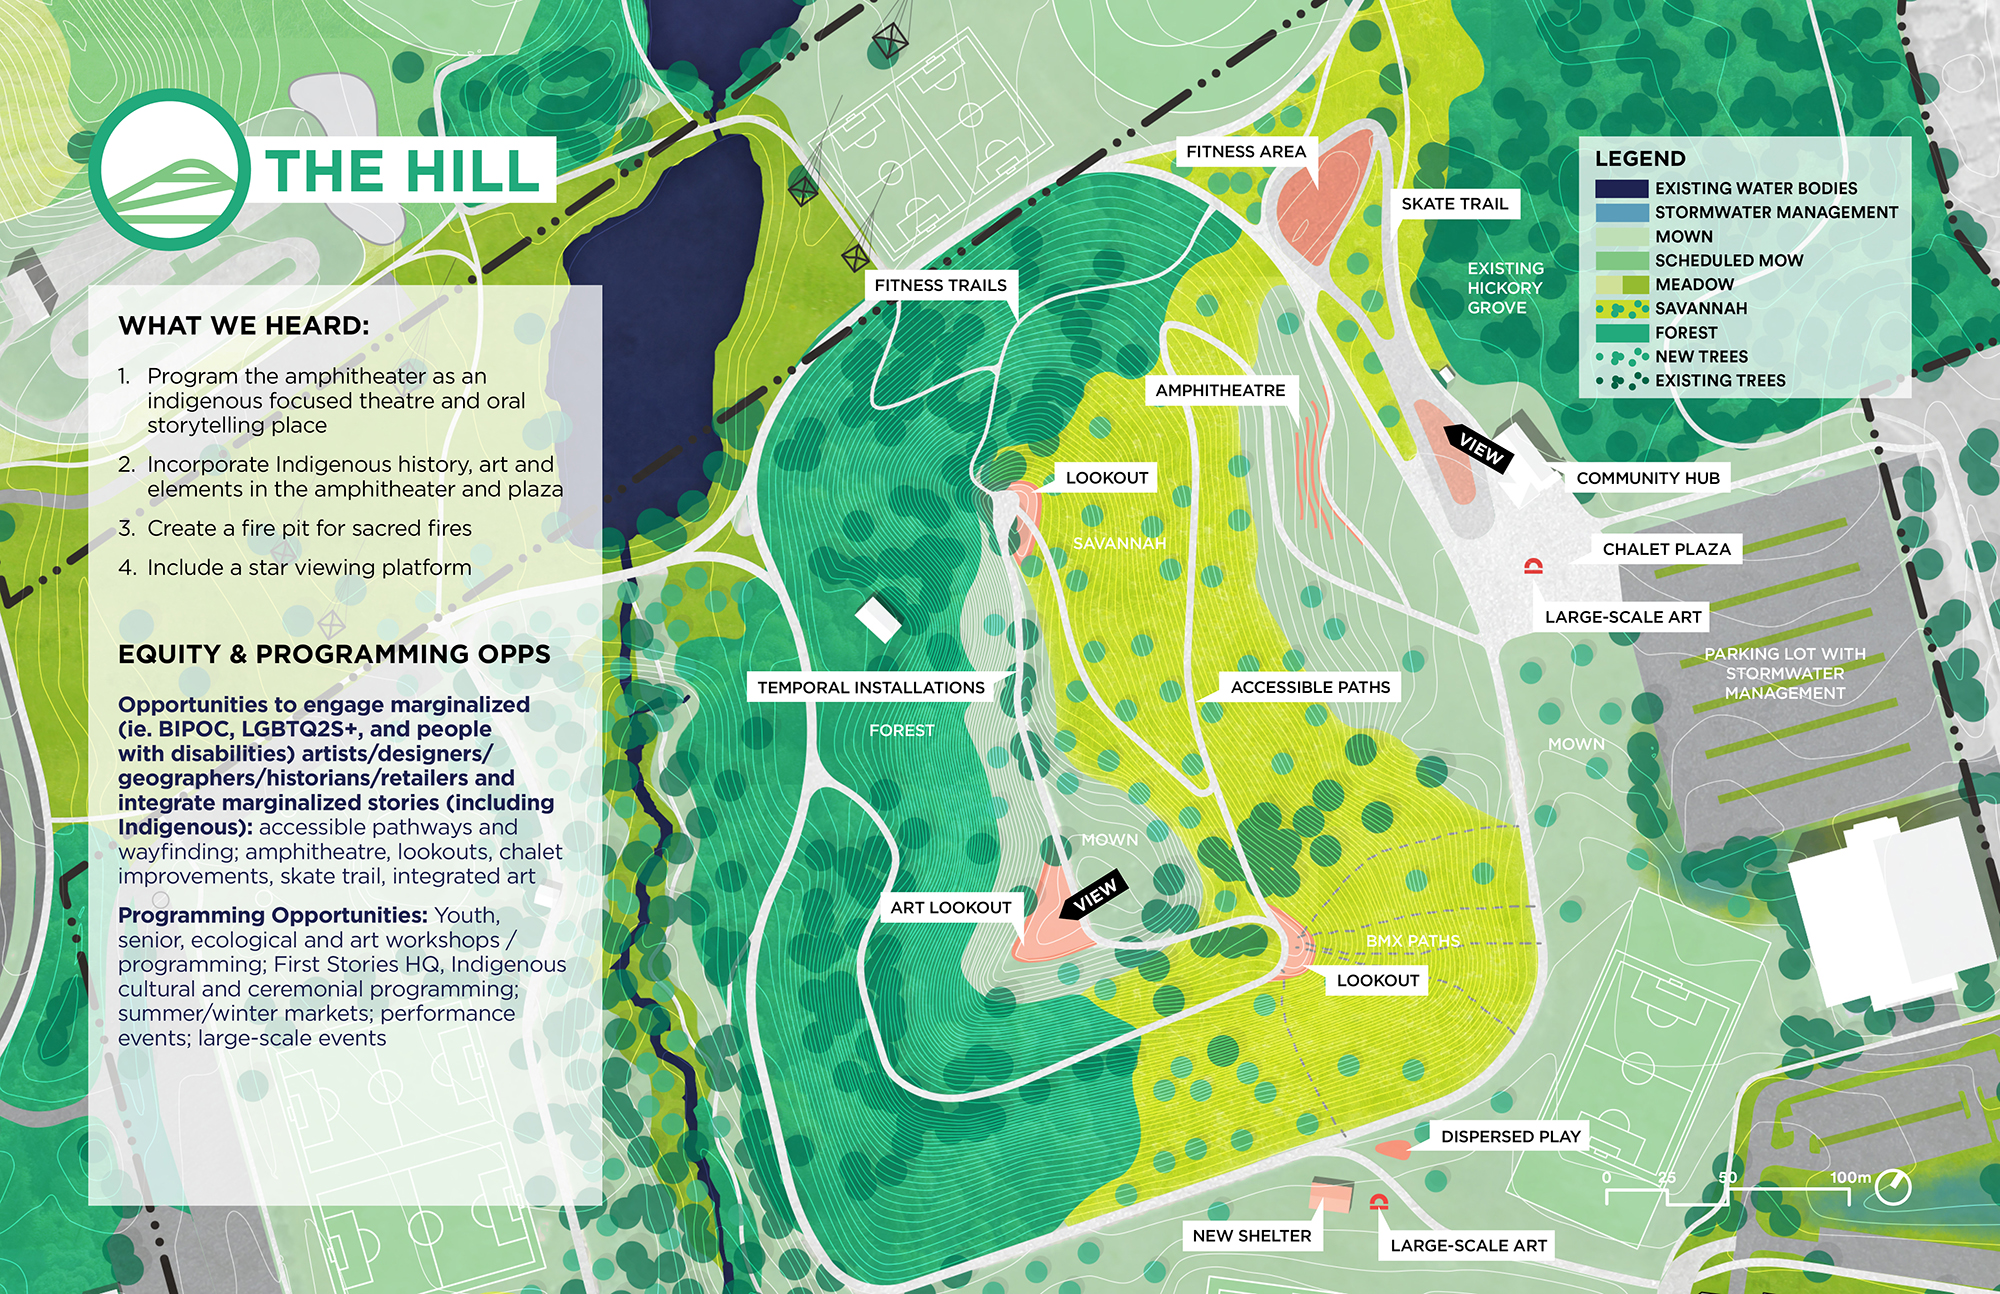 This plan image demonstrates what the design for the hill area could look like. Features include a community hub at the bottom of the hill with a skate trail, plaza, amphitheatre, and fitness area. An accessible path leads up the hill with two art lookouts, and temporal installation path at the top. Other features at the base of the hill include a new shelter, dispersed play and large scale art by the soccer fields. Also included are meadow, forest and savannah planting types.